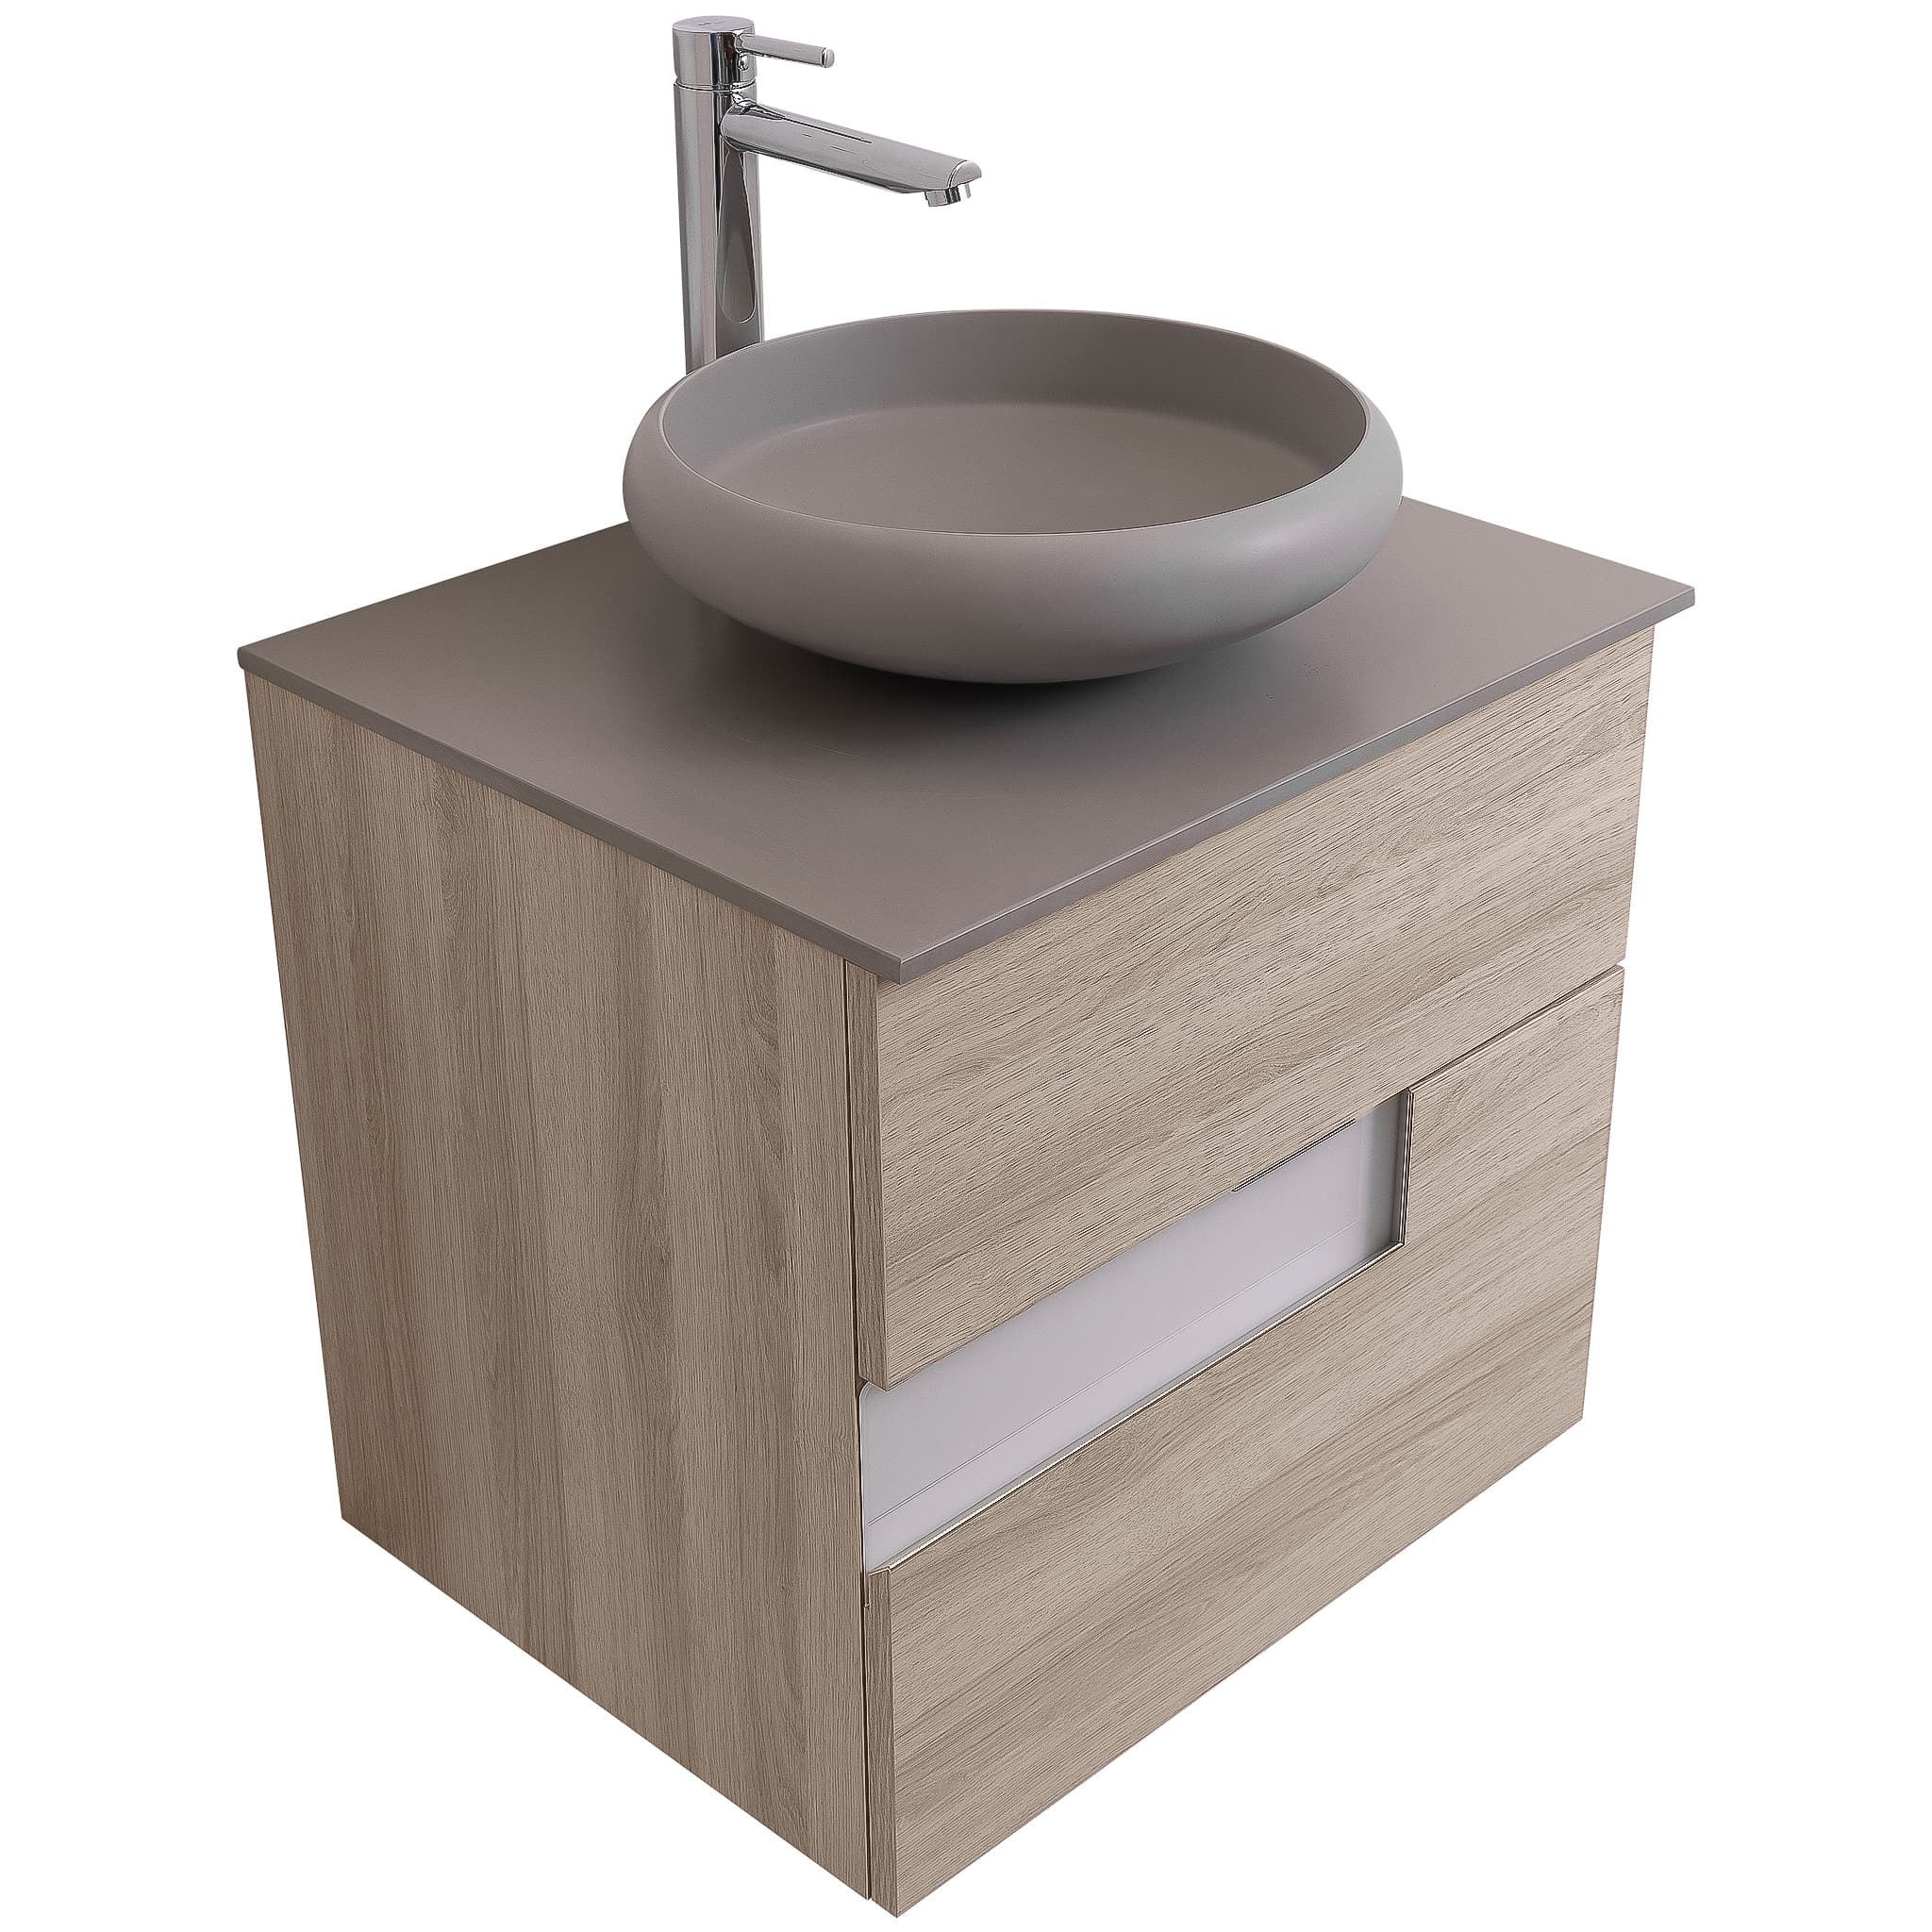 Vision 23.5 Natural Light Wood Cabinet, Solid Surface Flat Grey Counter And Round Solid Surface Grey Basin 1153, Wall Mounted Modern Vanity Set